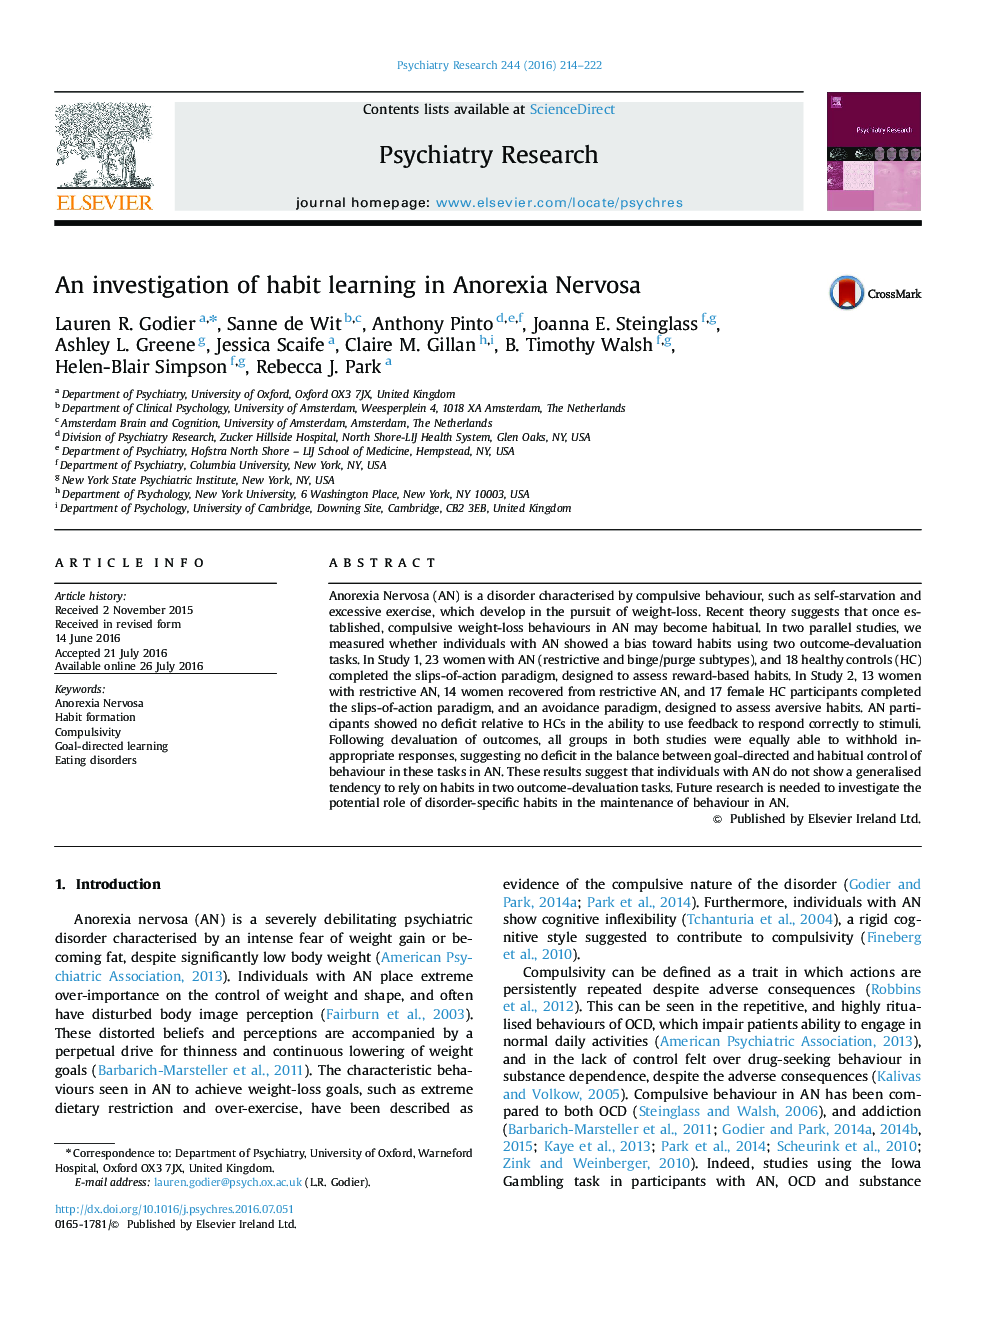 An investigation of habit learning in Anorexia Nervosa